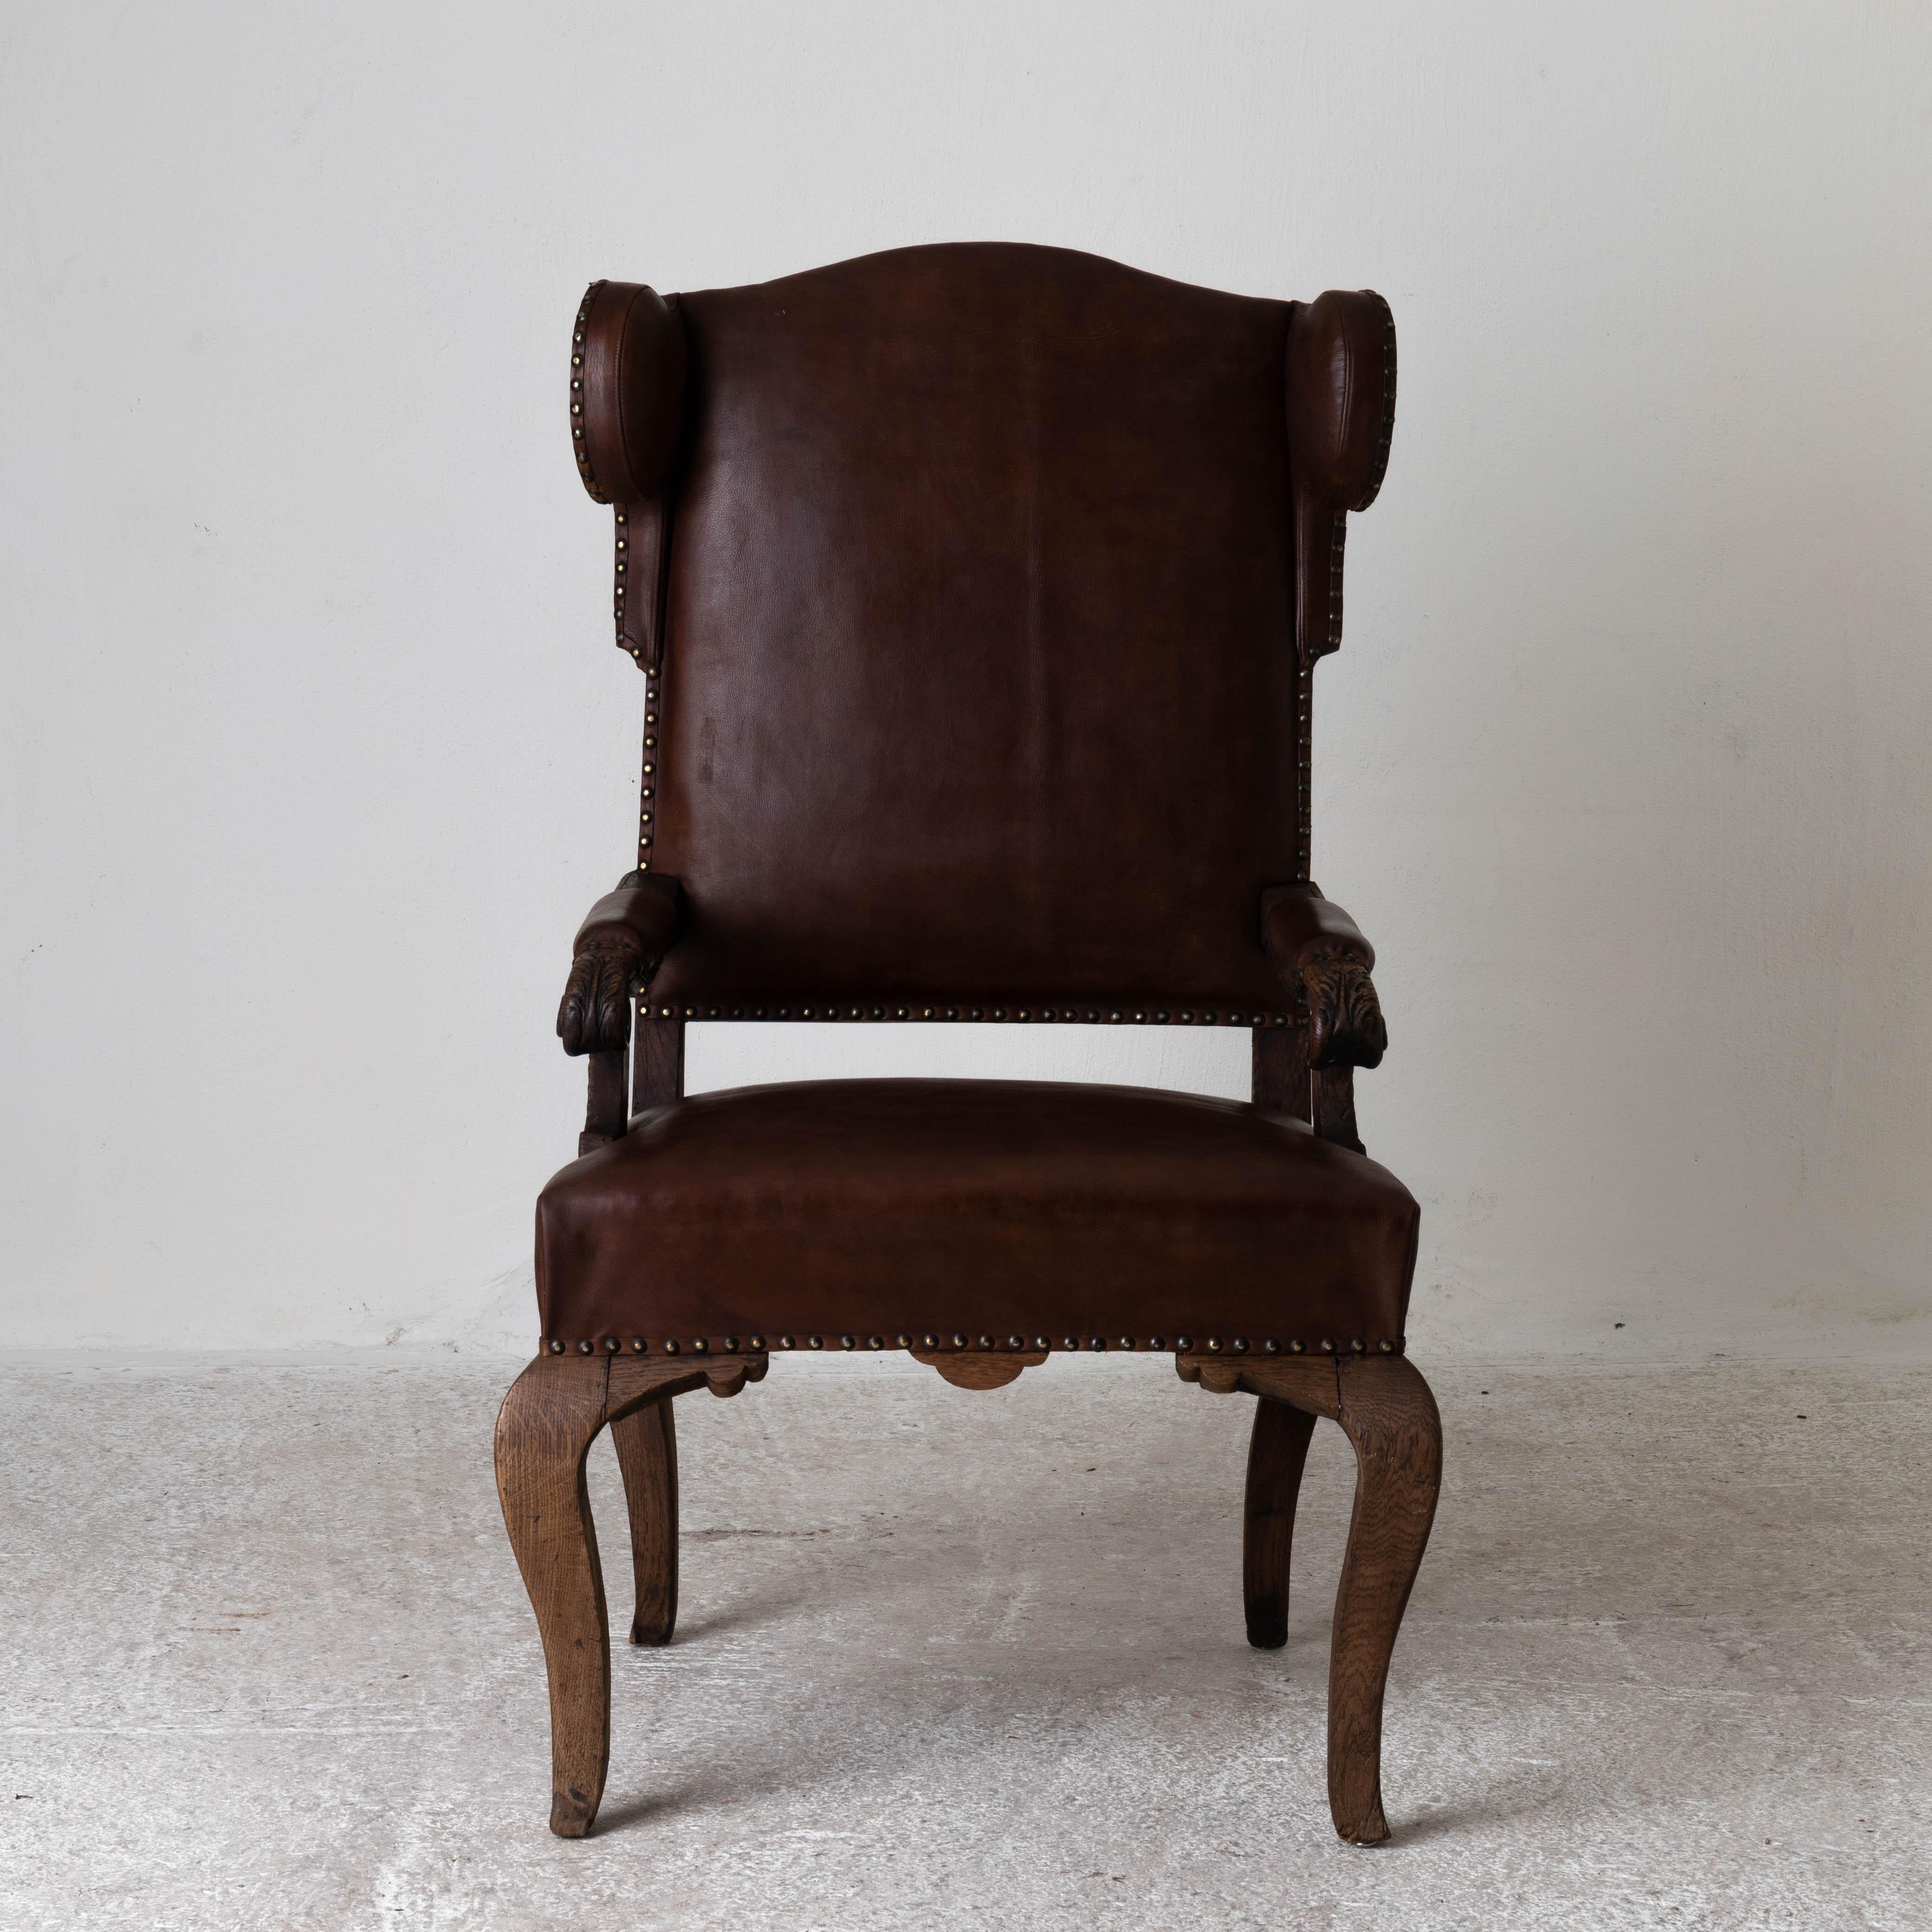 Chair French Wingback Rococo Period France. A wingback chair made during the Rococo period in France 1720-1750. Original finish and upholstered in a waxed brown leather. 

Measures: H: 47.8

W: 25”

D: 23.5” 

SH: 20”.

 